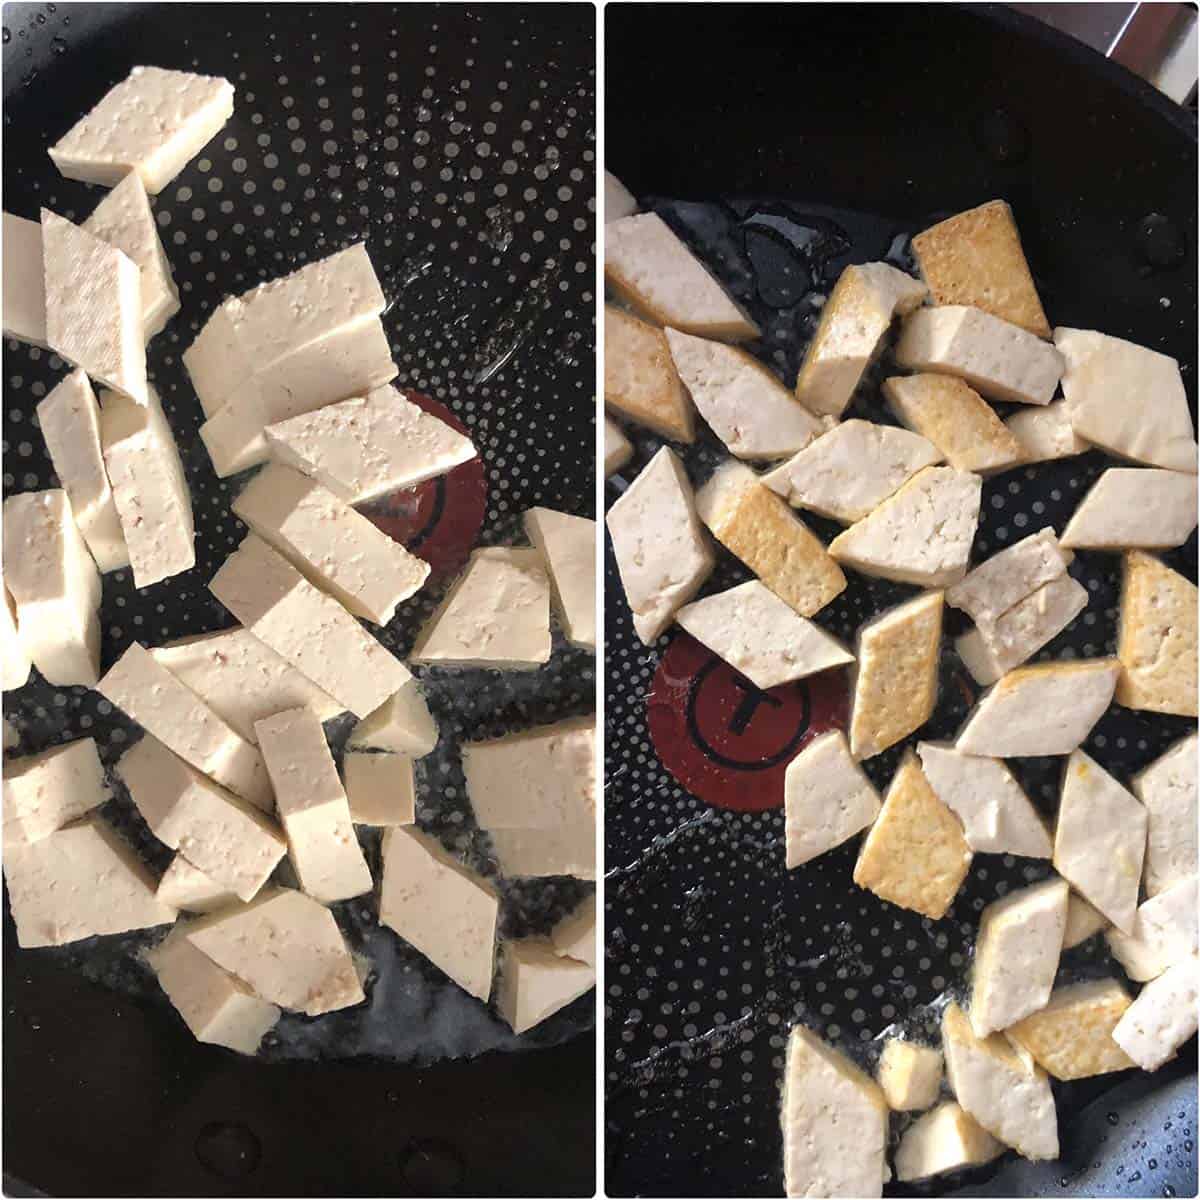 2 panel photo showing the sautéing of tofu in nonstick pan.